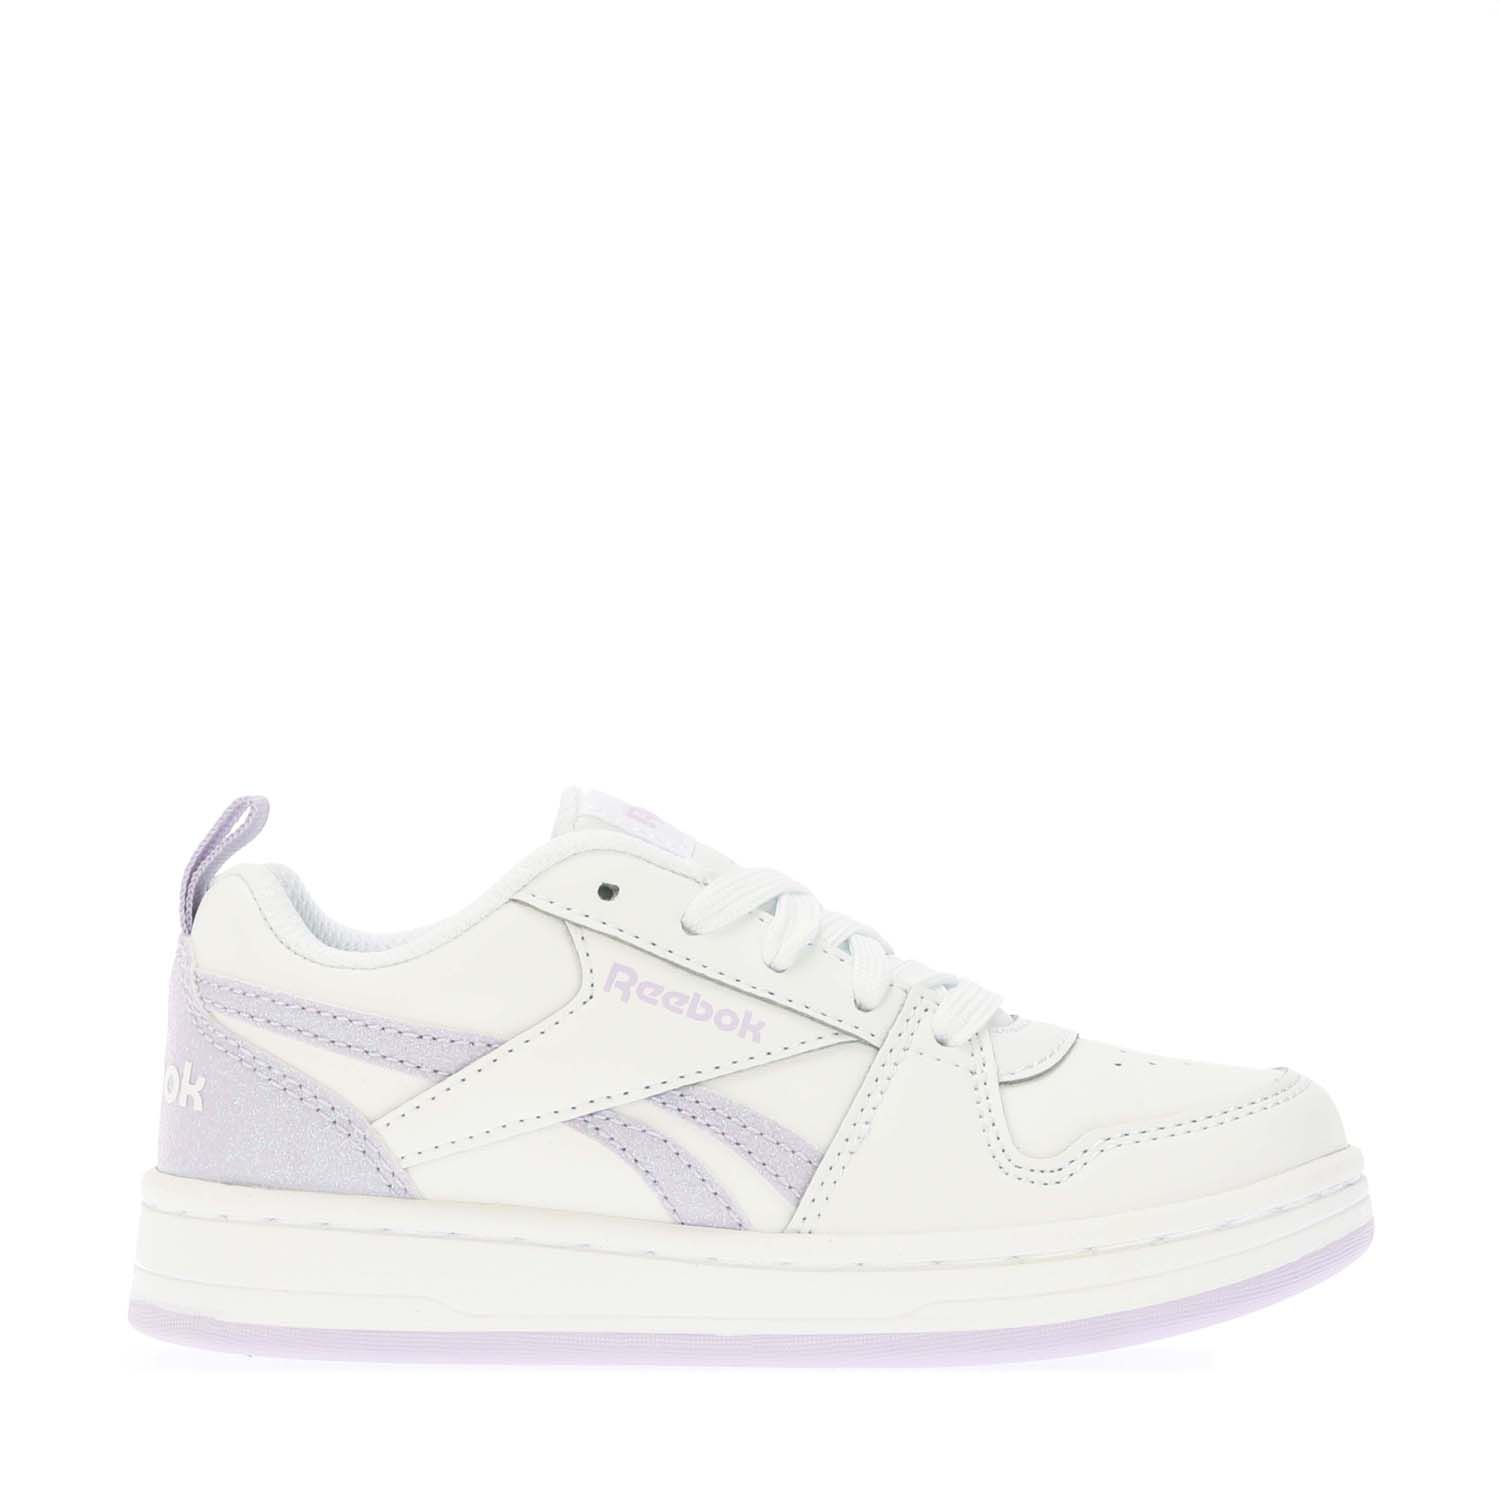 Girls Royal Prime 2.0 Trainers